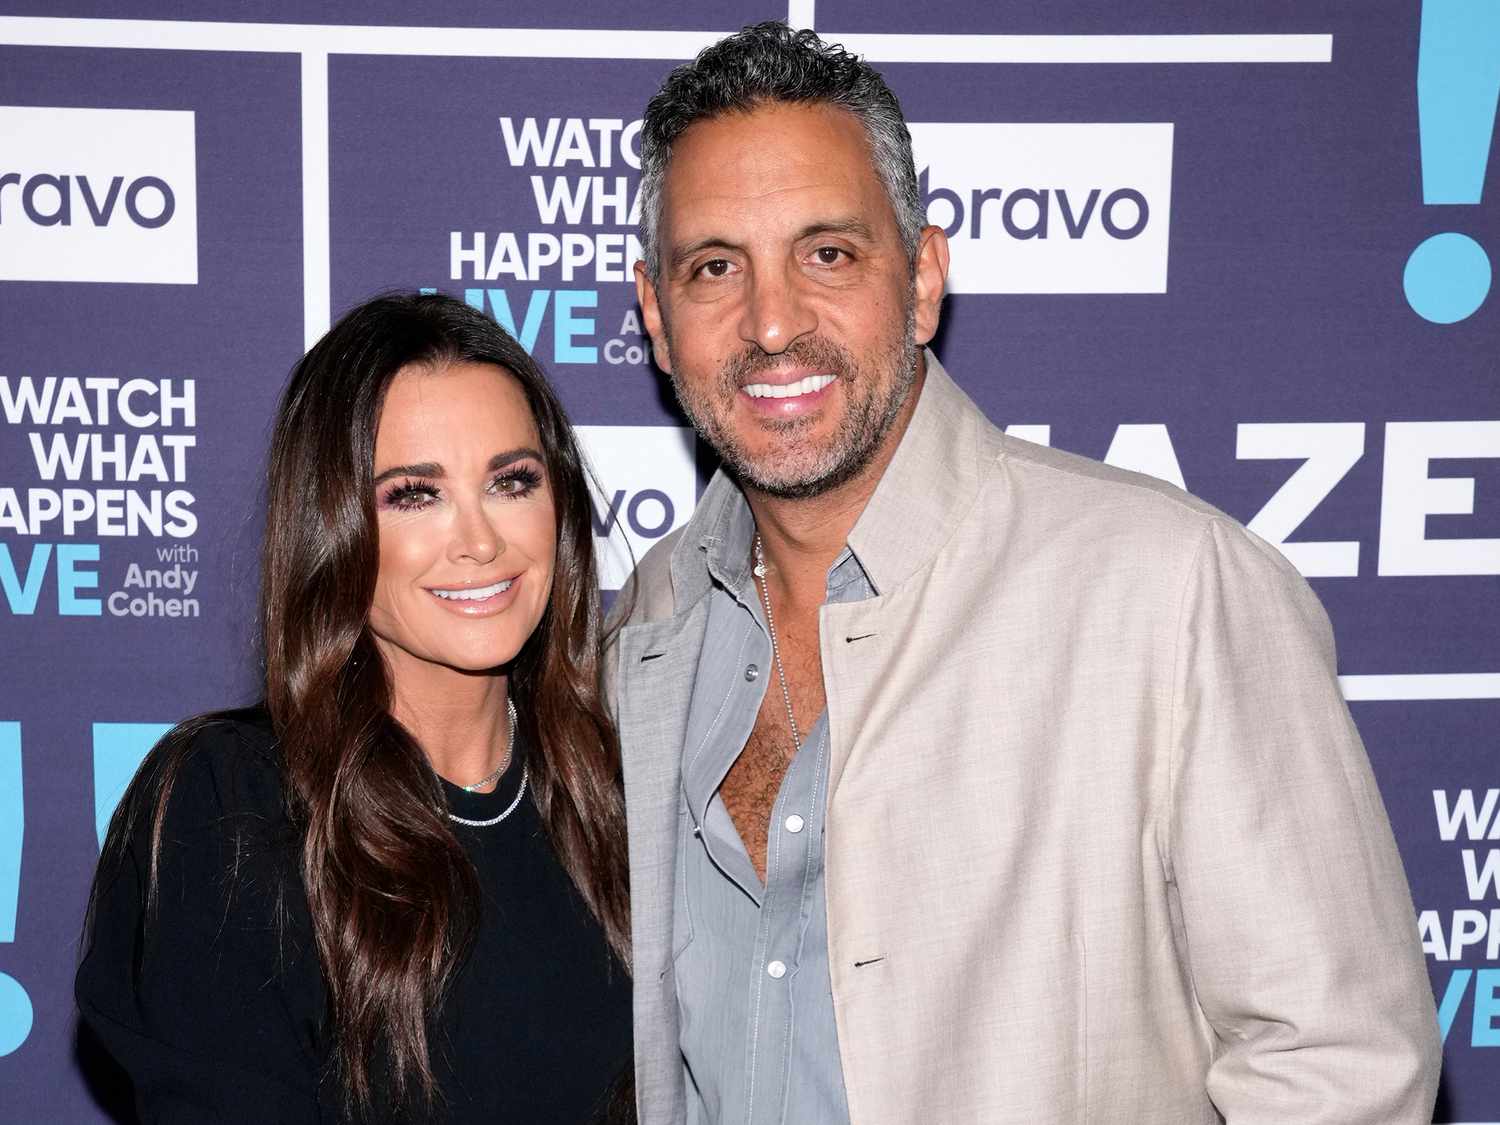 Here Are The Updates On The Net Worth Of Mauricio Umansky!